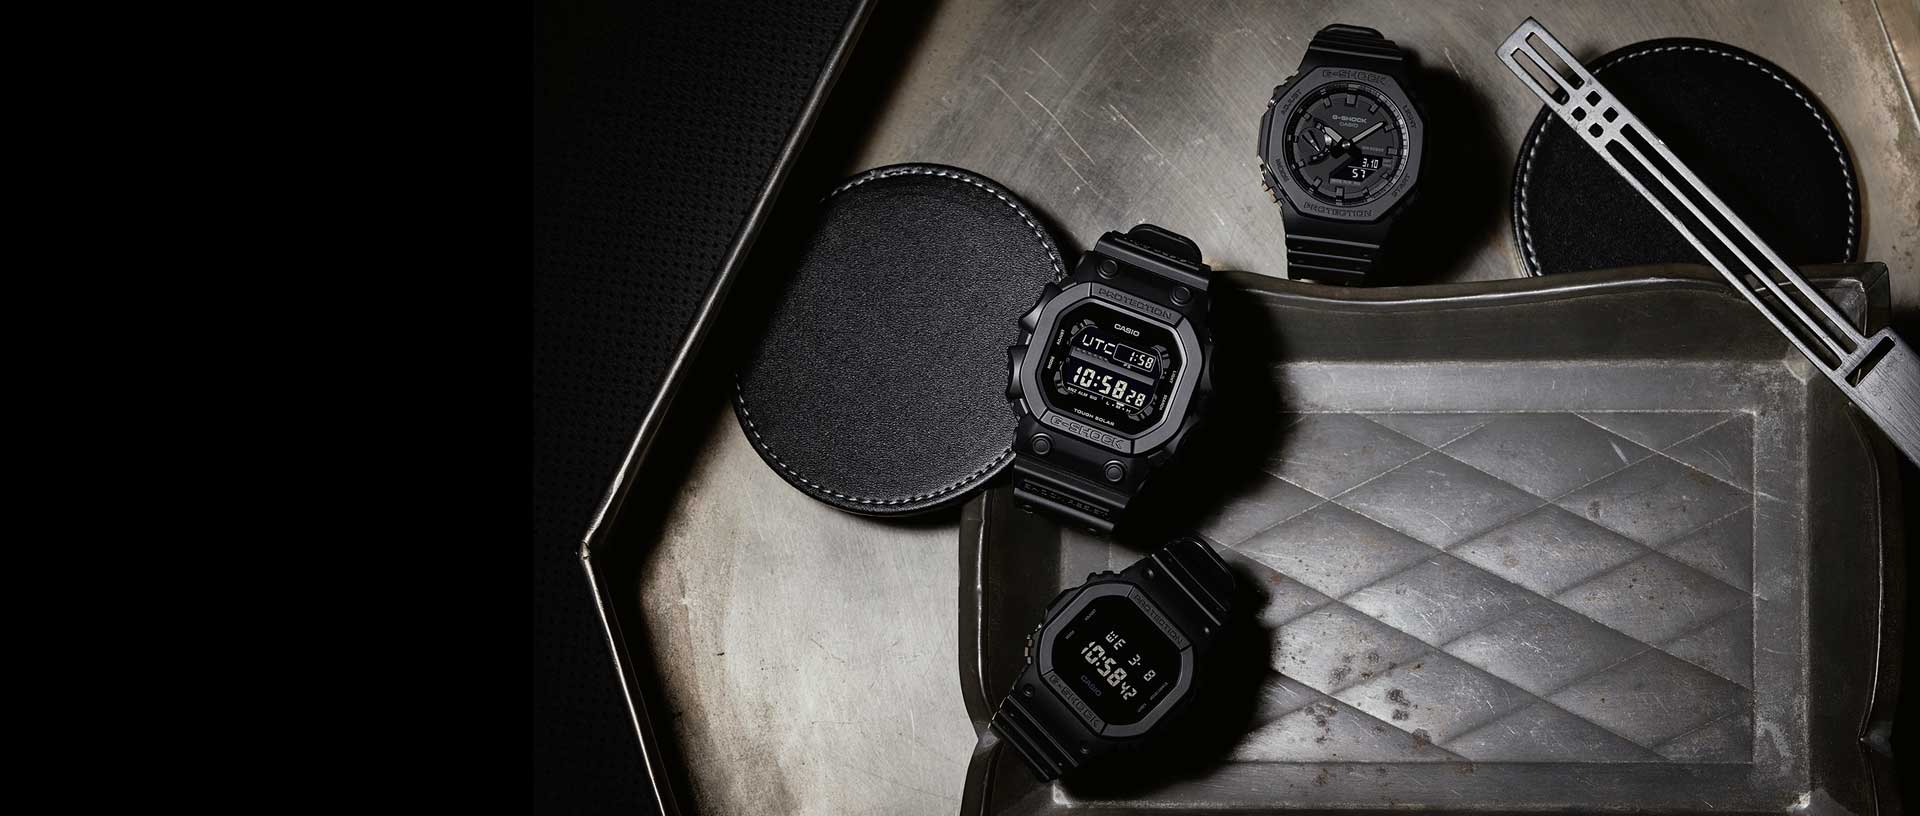 Three All Black Digital and Analog Digital G-SHOCK watches on a metal surface